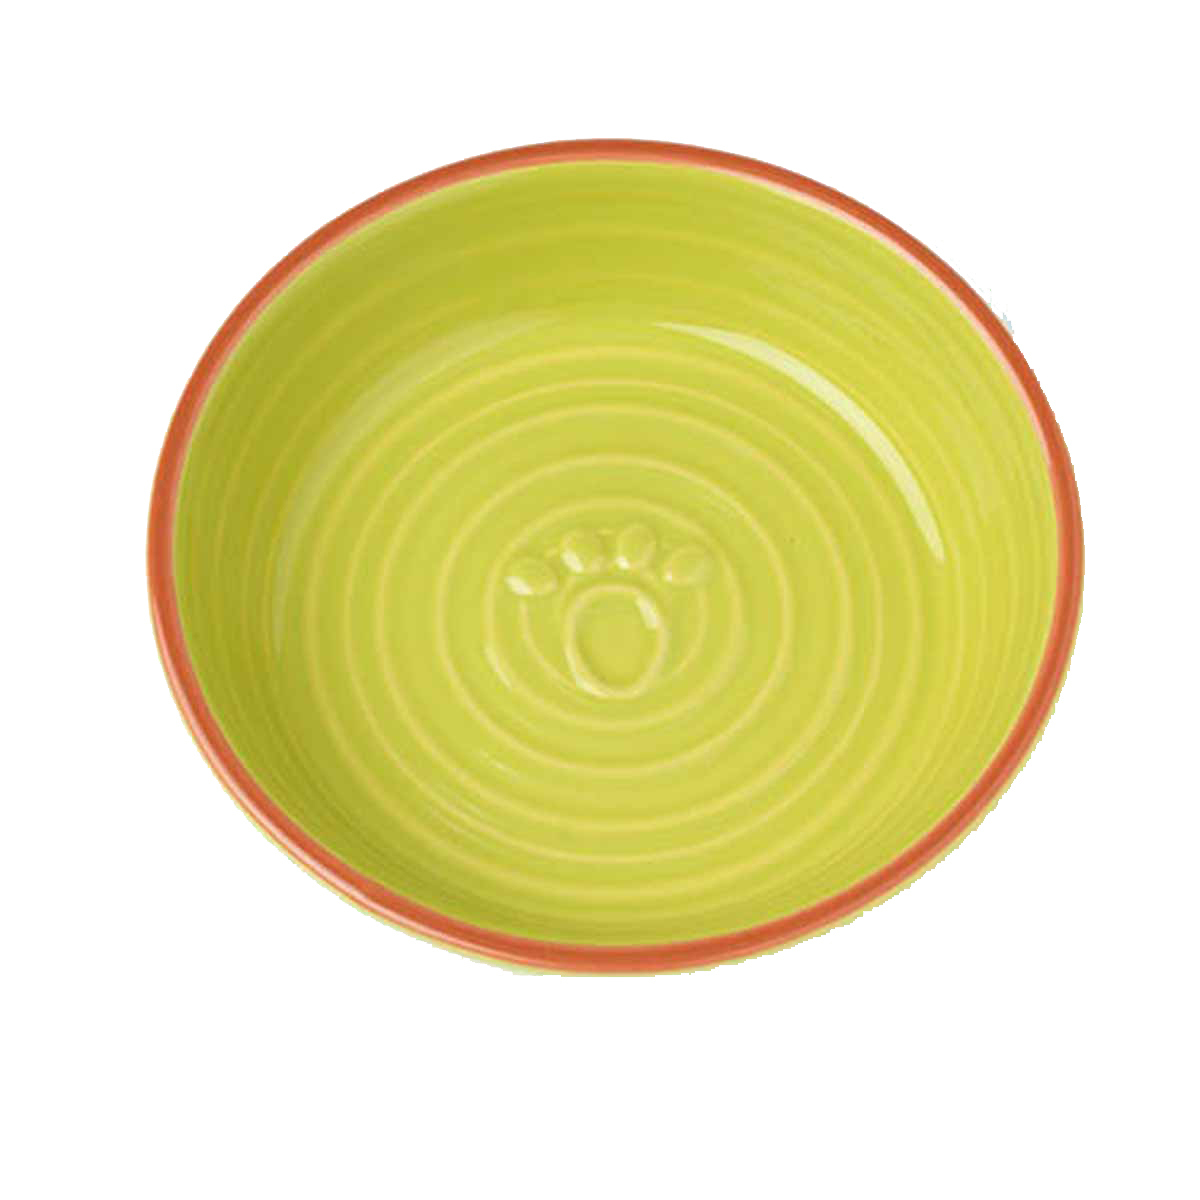 Petrageous Key West Embossed Paw Pet Saucer - Lime